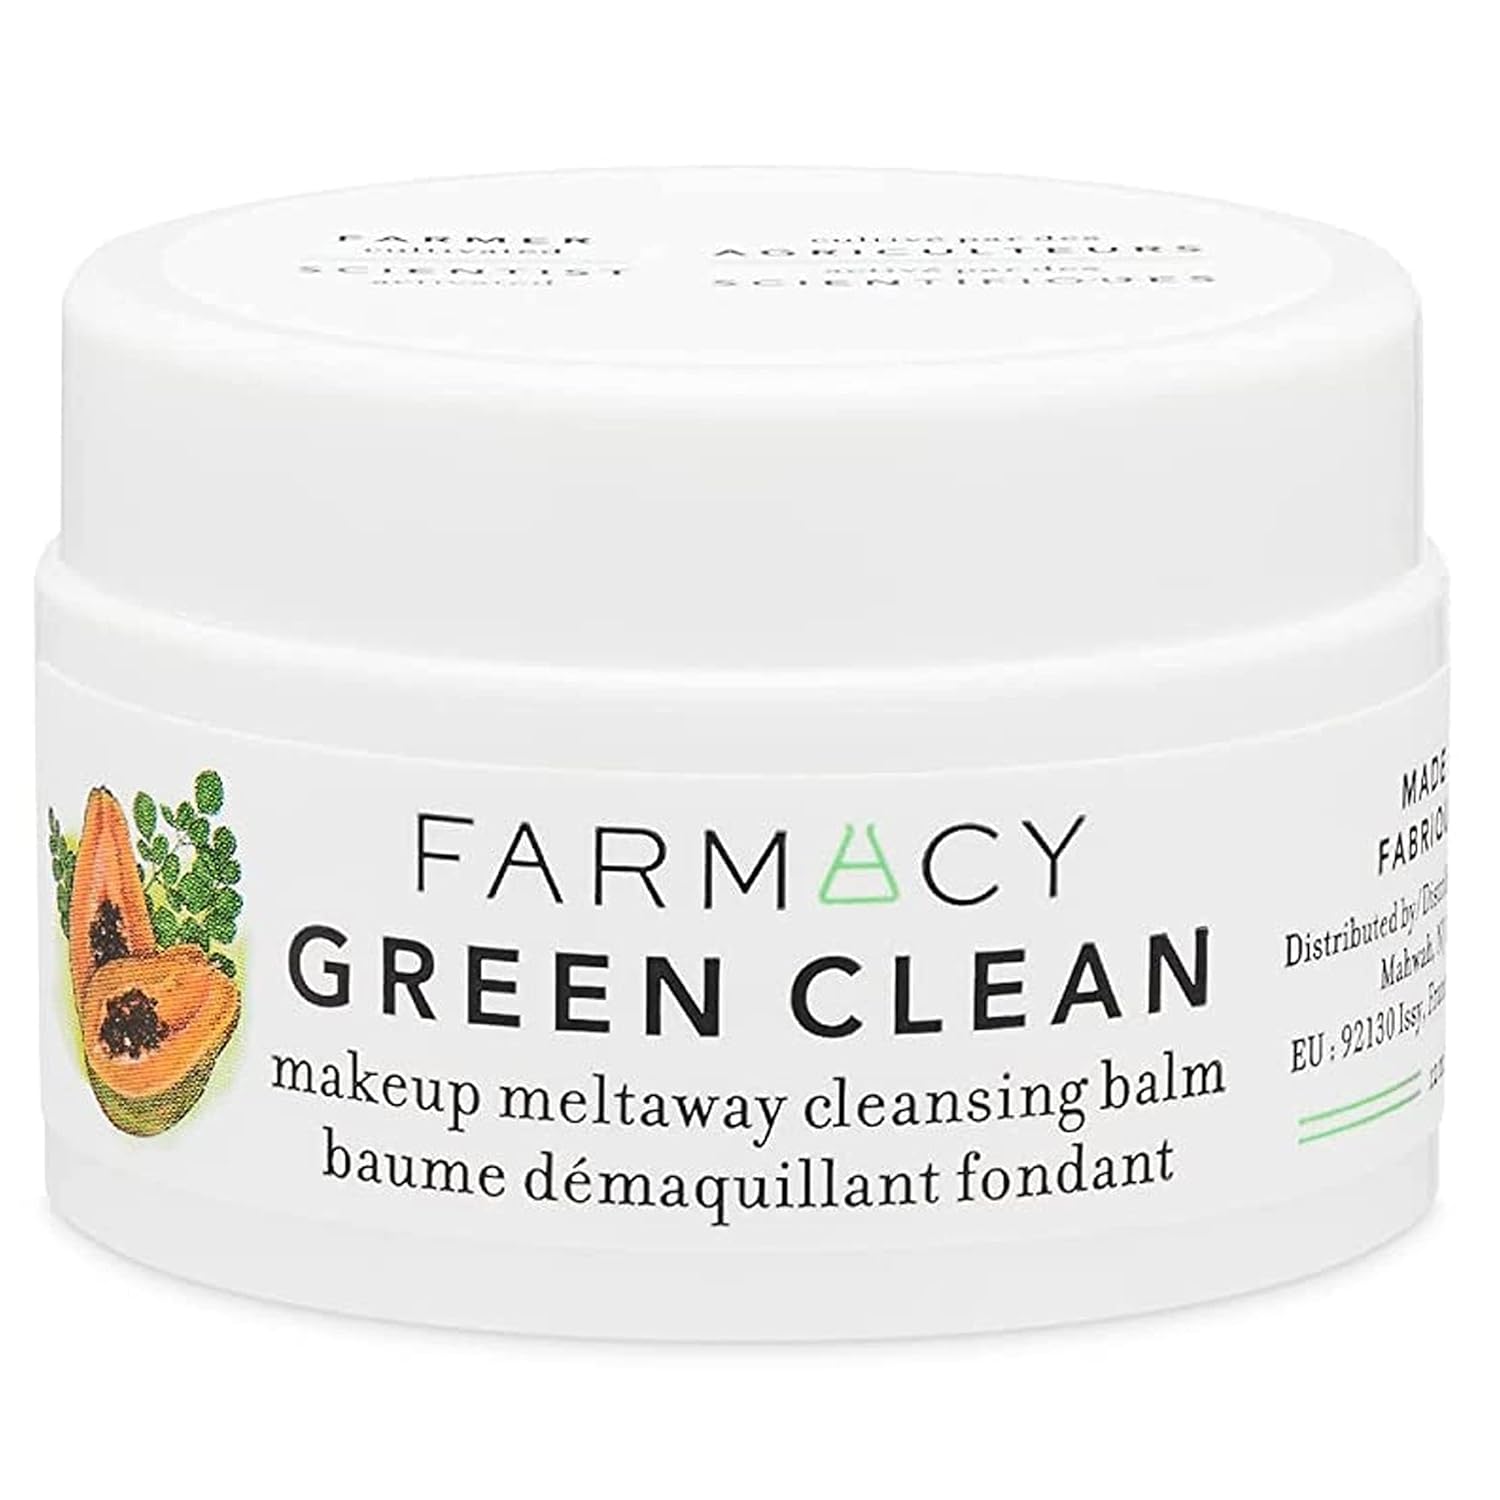 Farmacy Natural Makeup Remover - Green Clean Makeup Meltaway Cleansing Balm Cosmetic - 12ml Sample Size